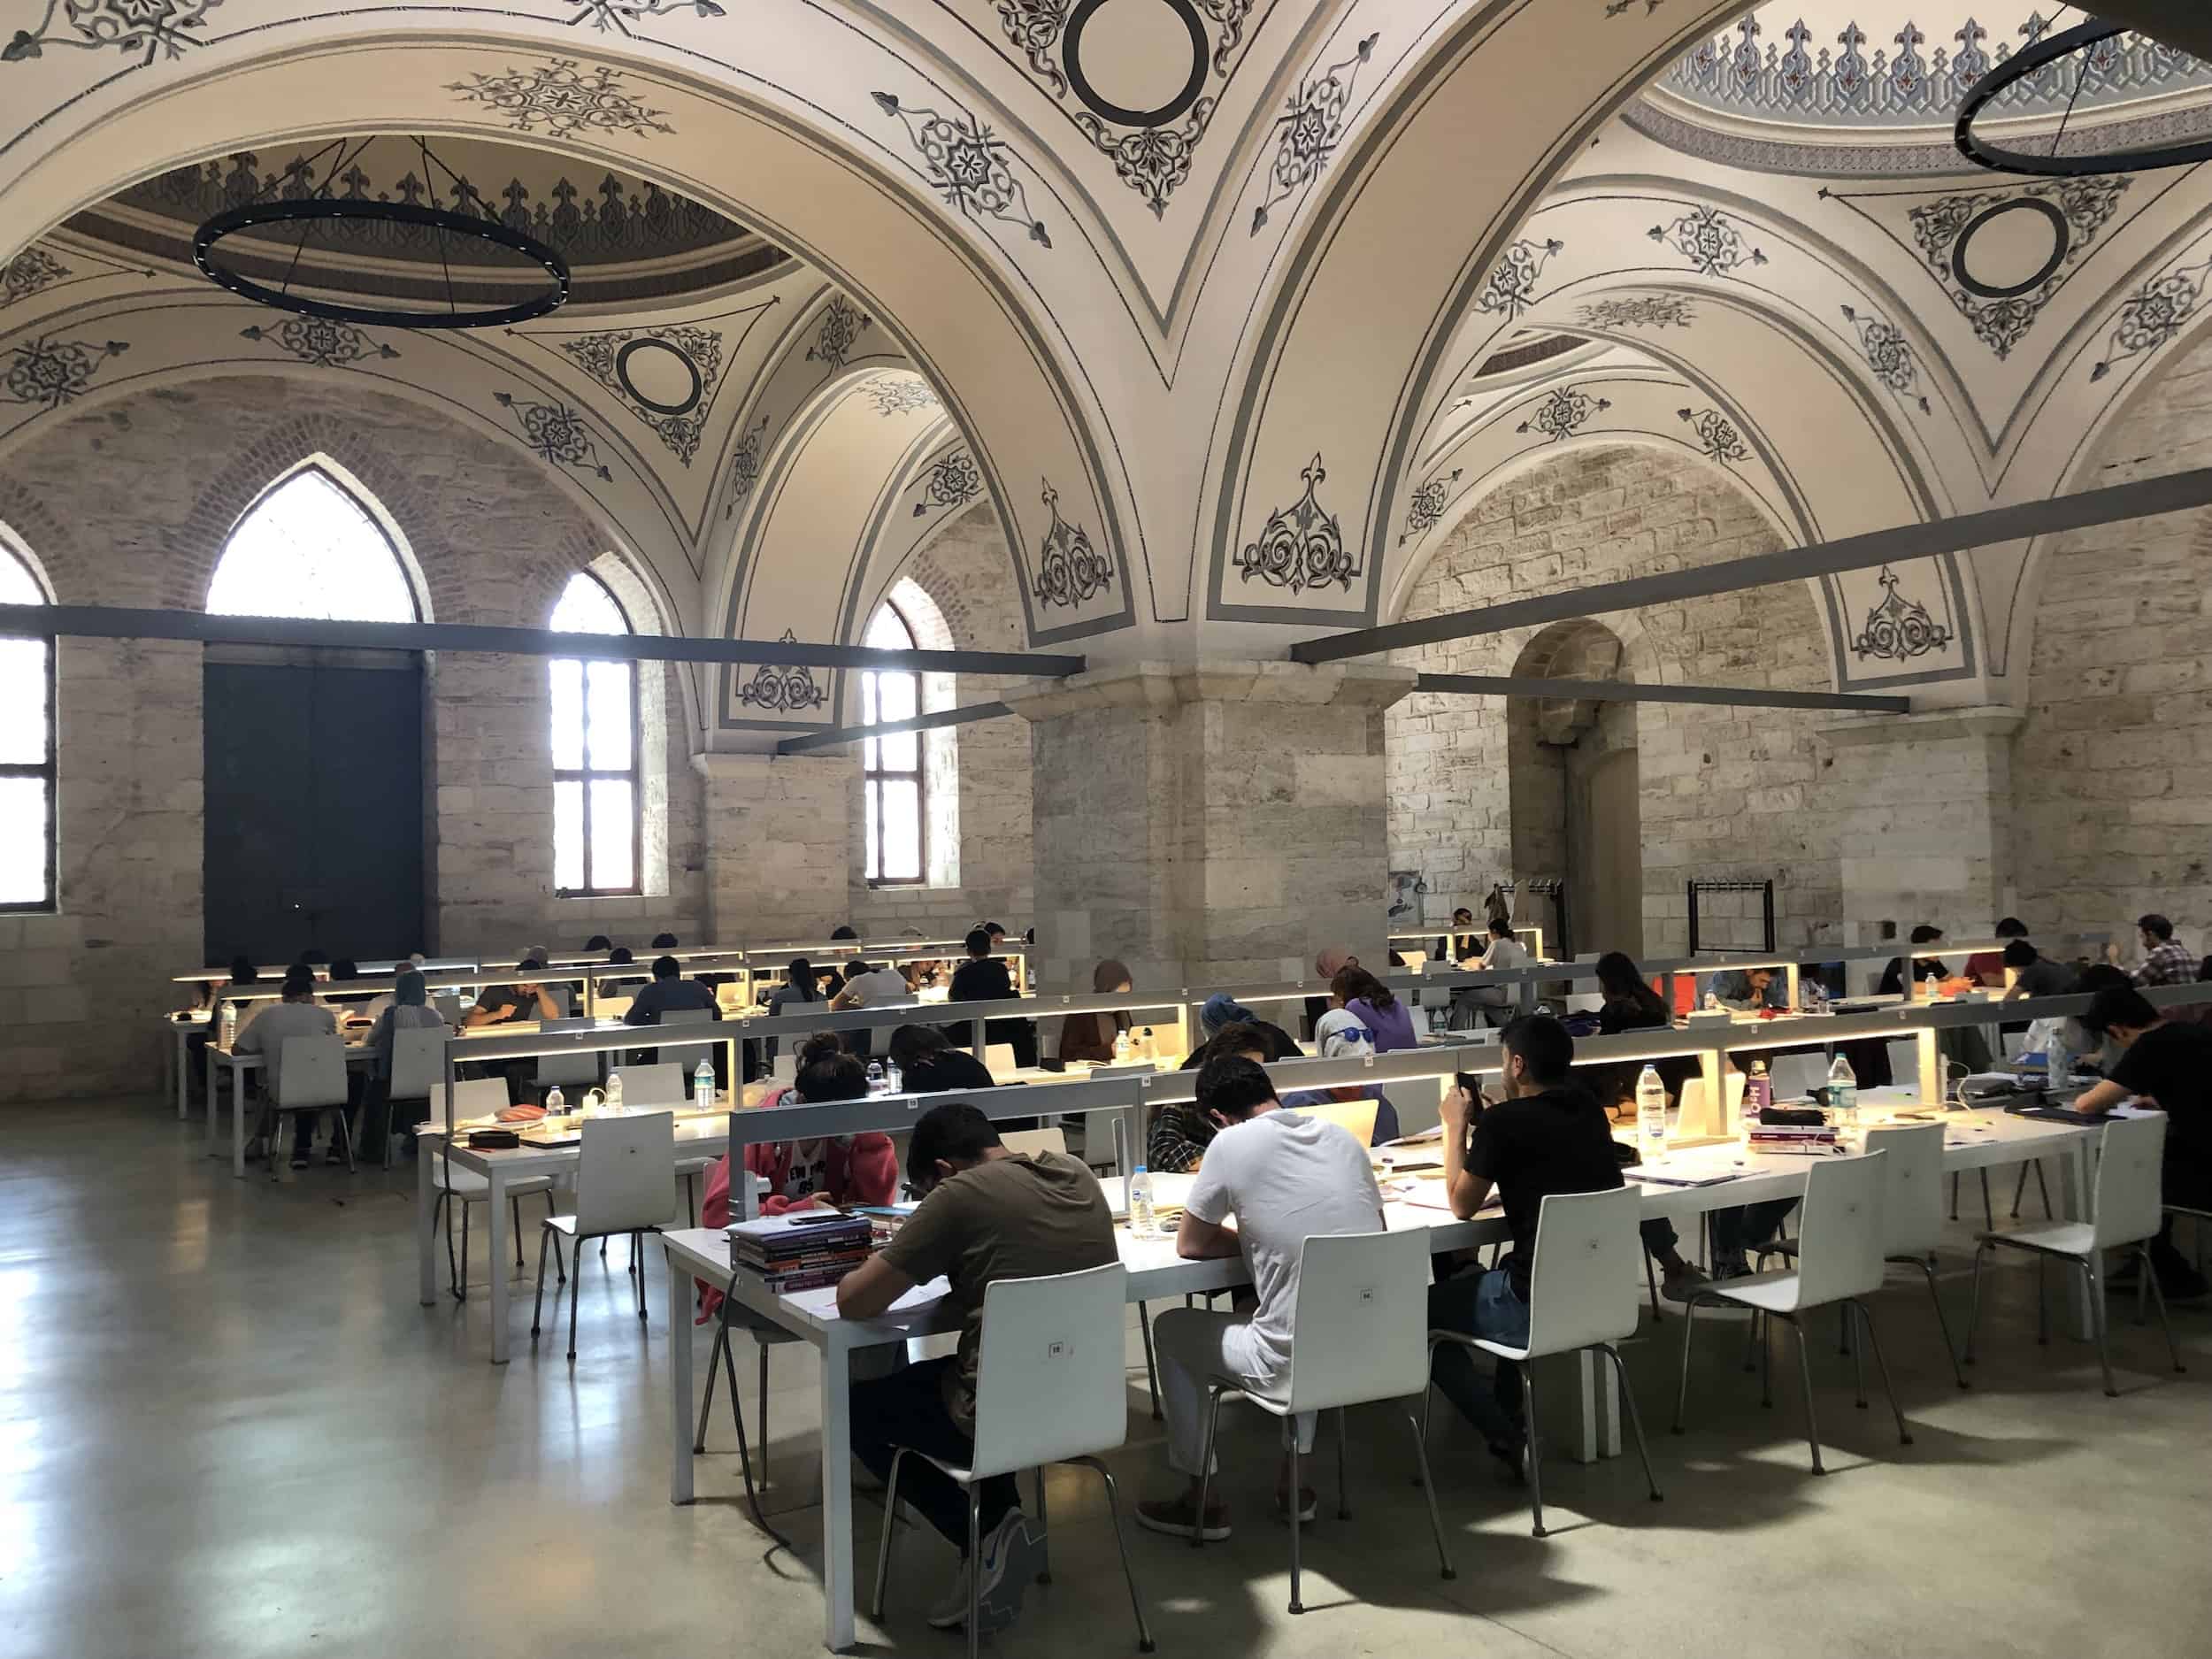 Reading room of the Beyazıt State Library on Beyazıt Square in Istanbul, Turkey